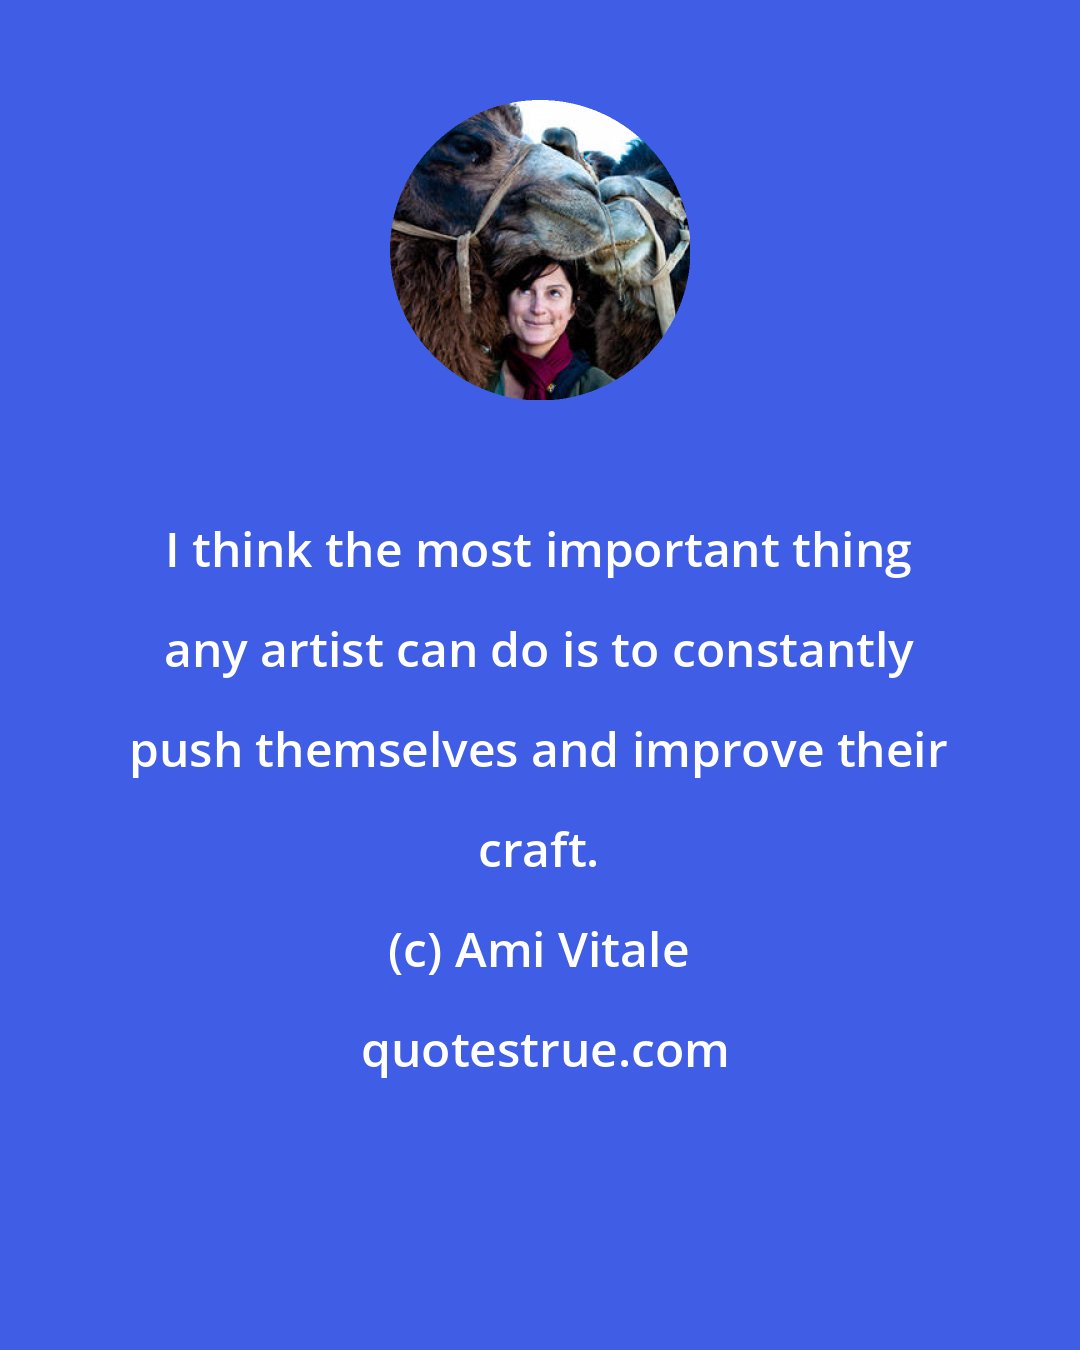 Ami Vitale: I think the most important thing any artist can do is to constantly push themselves and improve their craft.